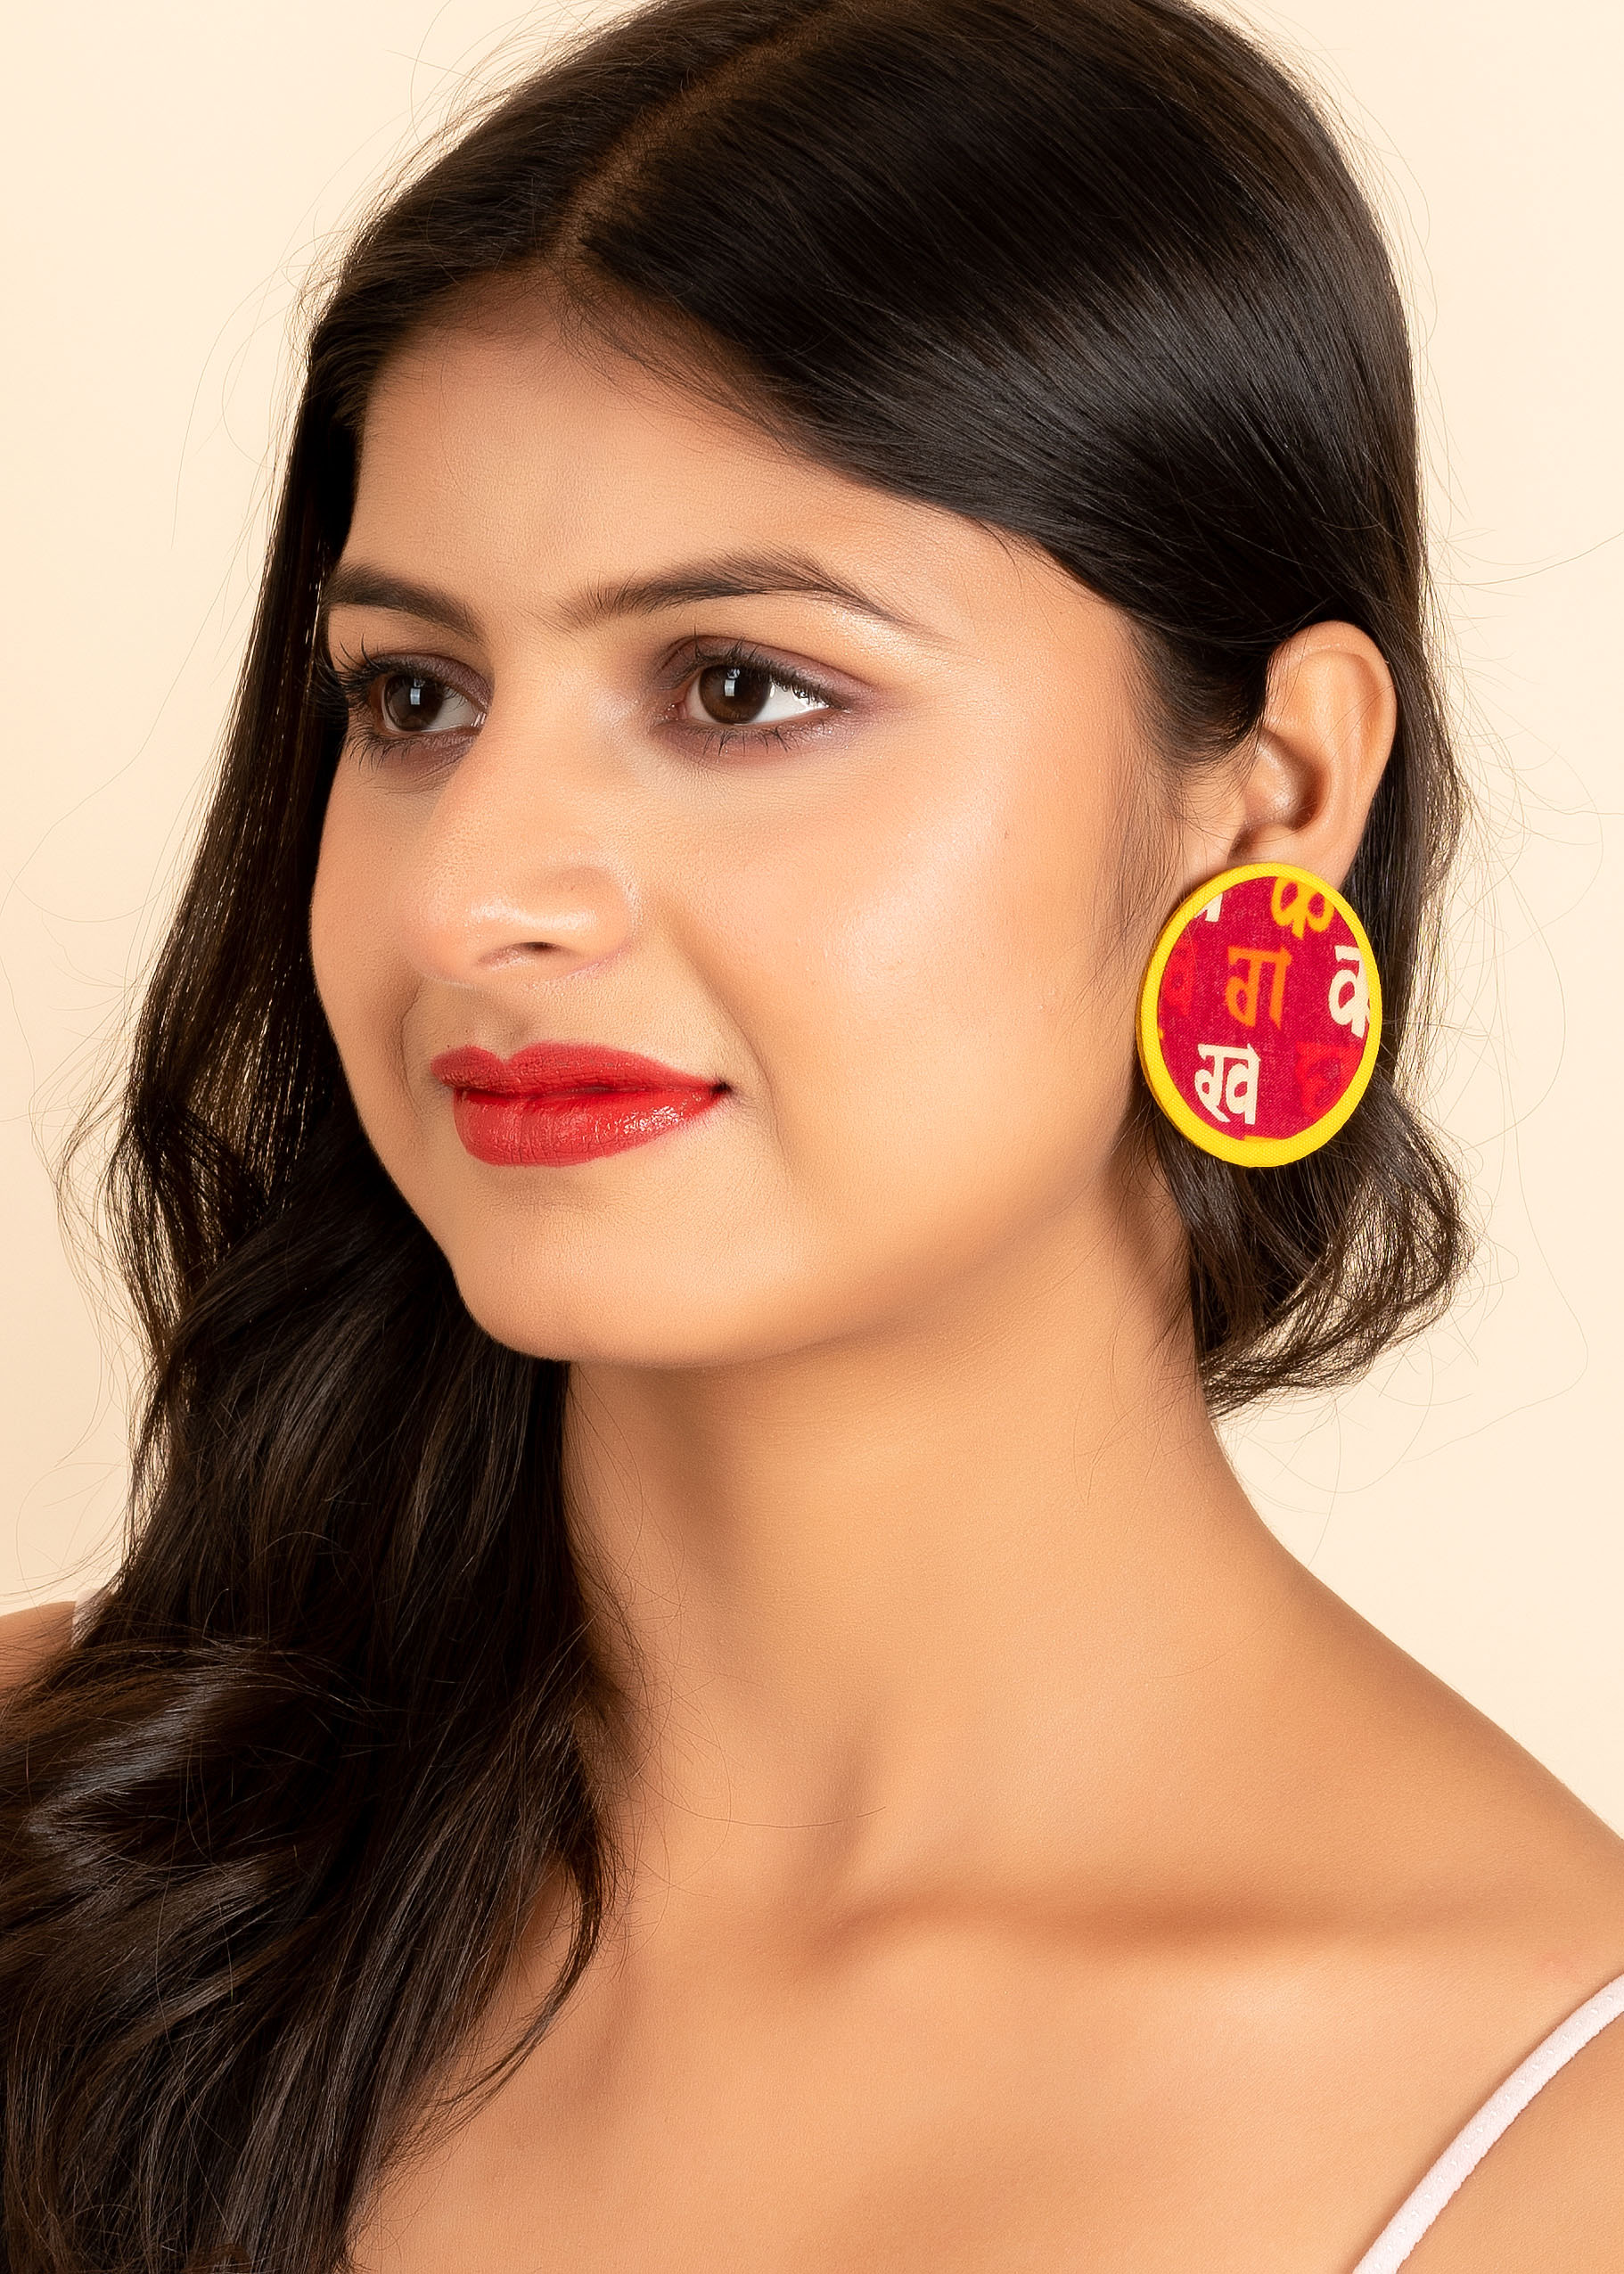 Jhumka Captions for Instagram in Hindi